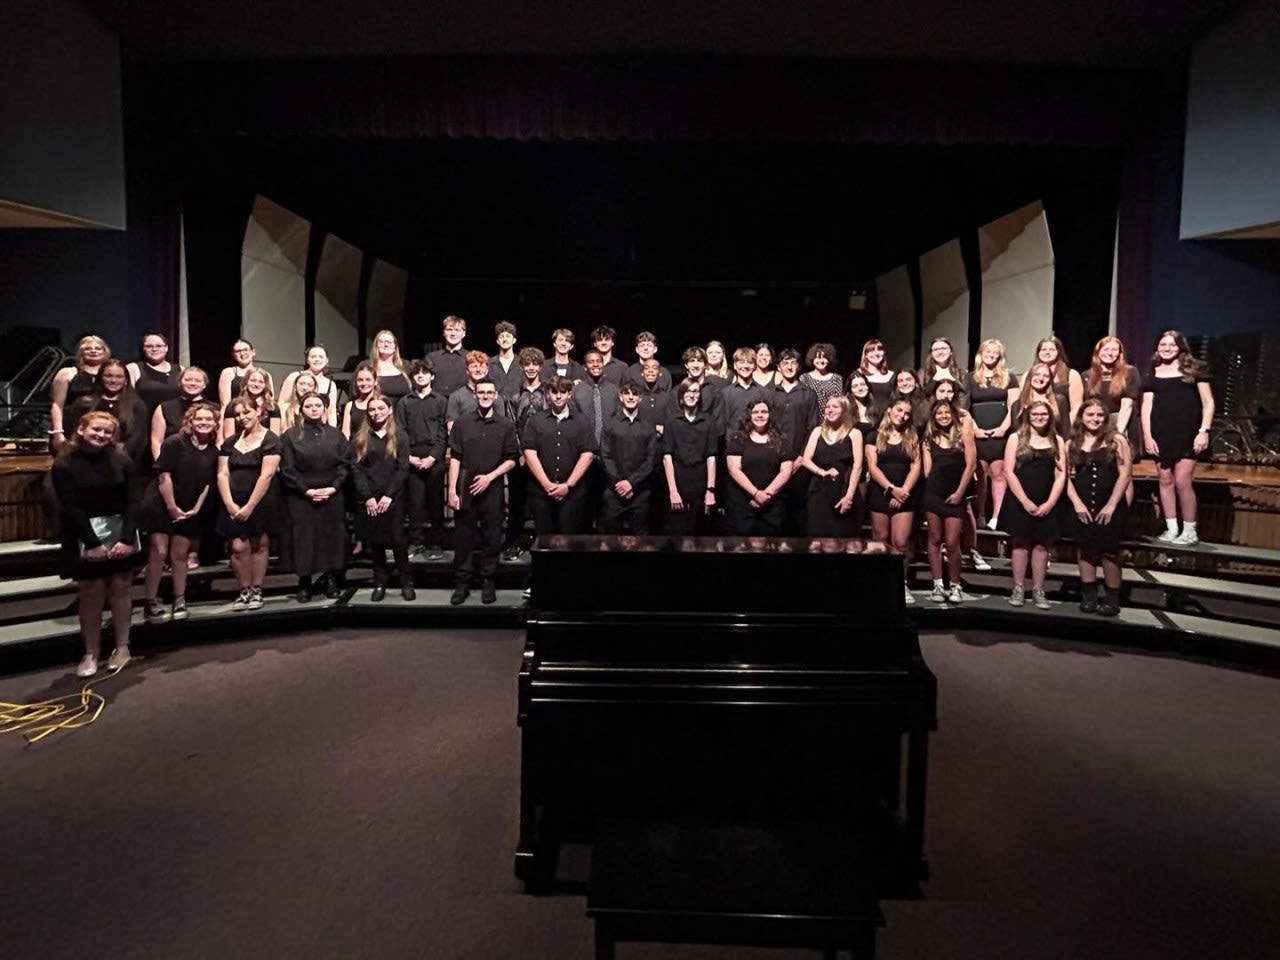 Broadalbin-Perth student chorus chosen to sing with Foreigner